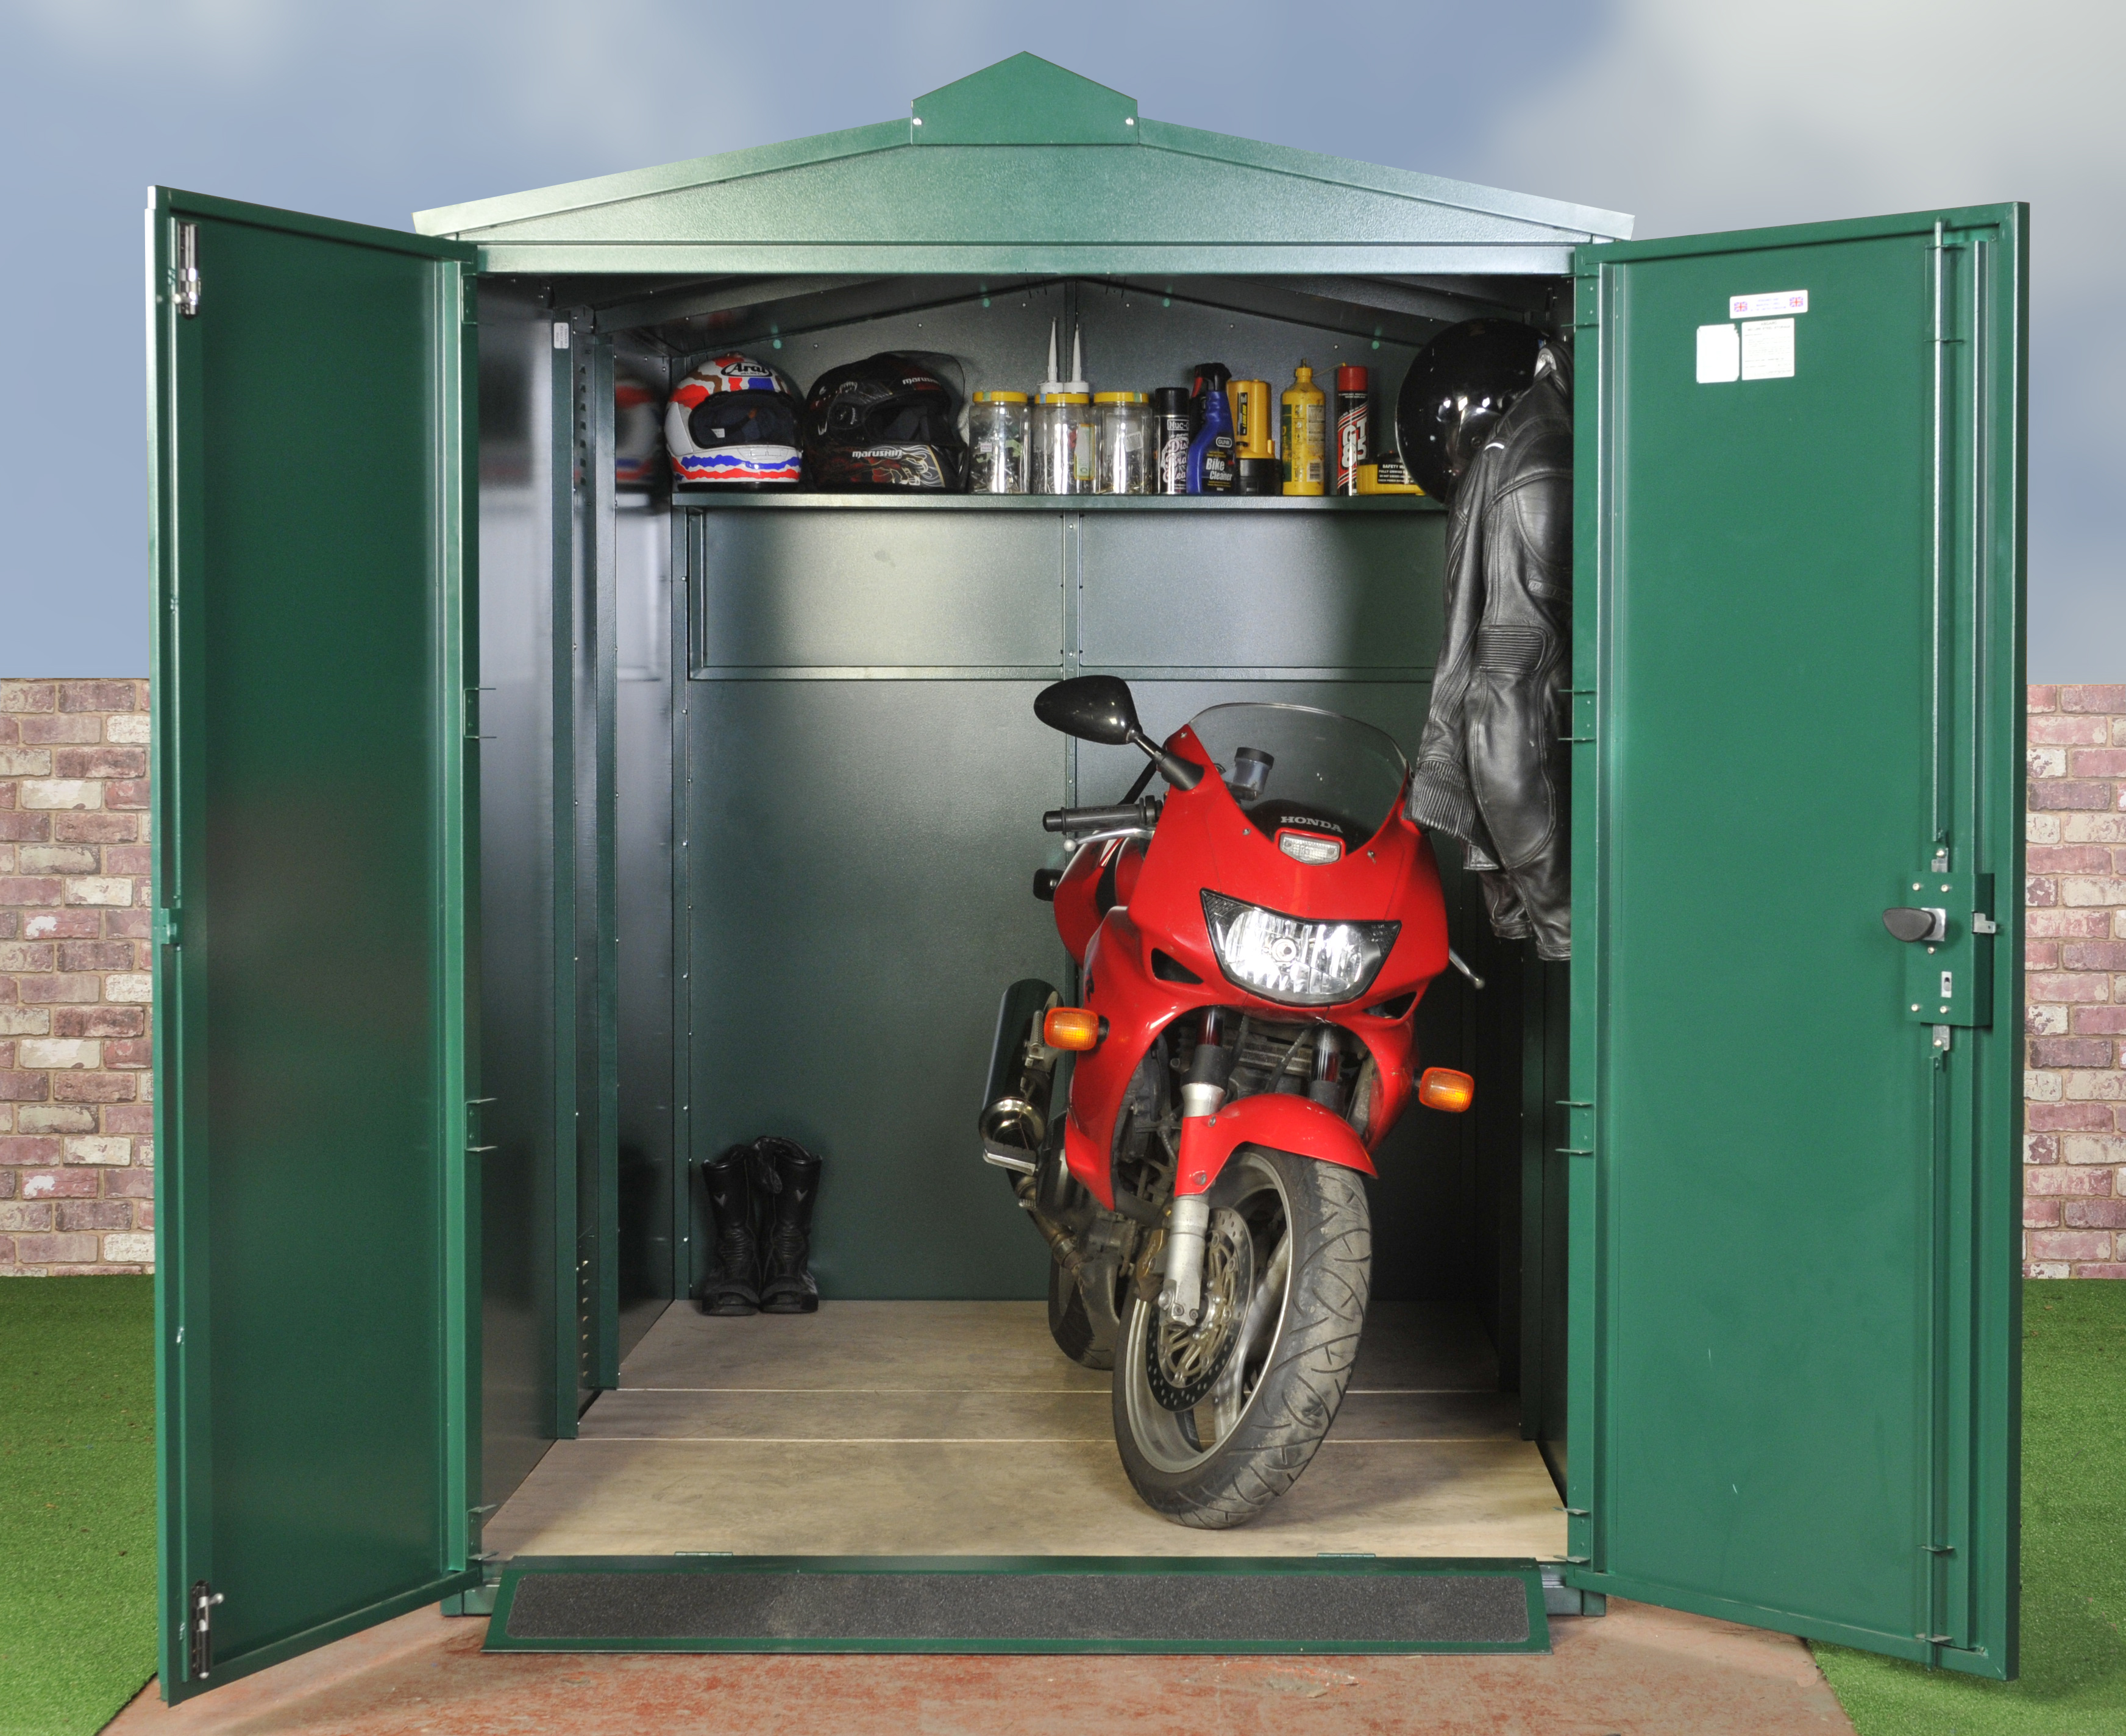 Motorcycle Garages can help you save on insurance Asgard